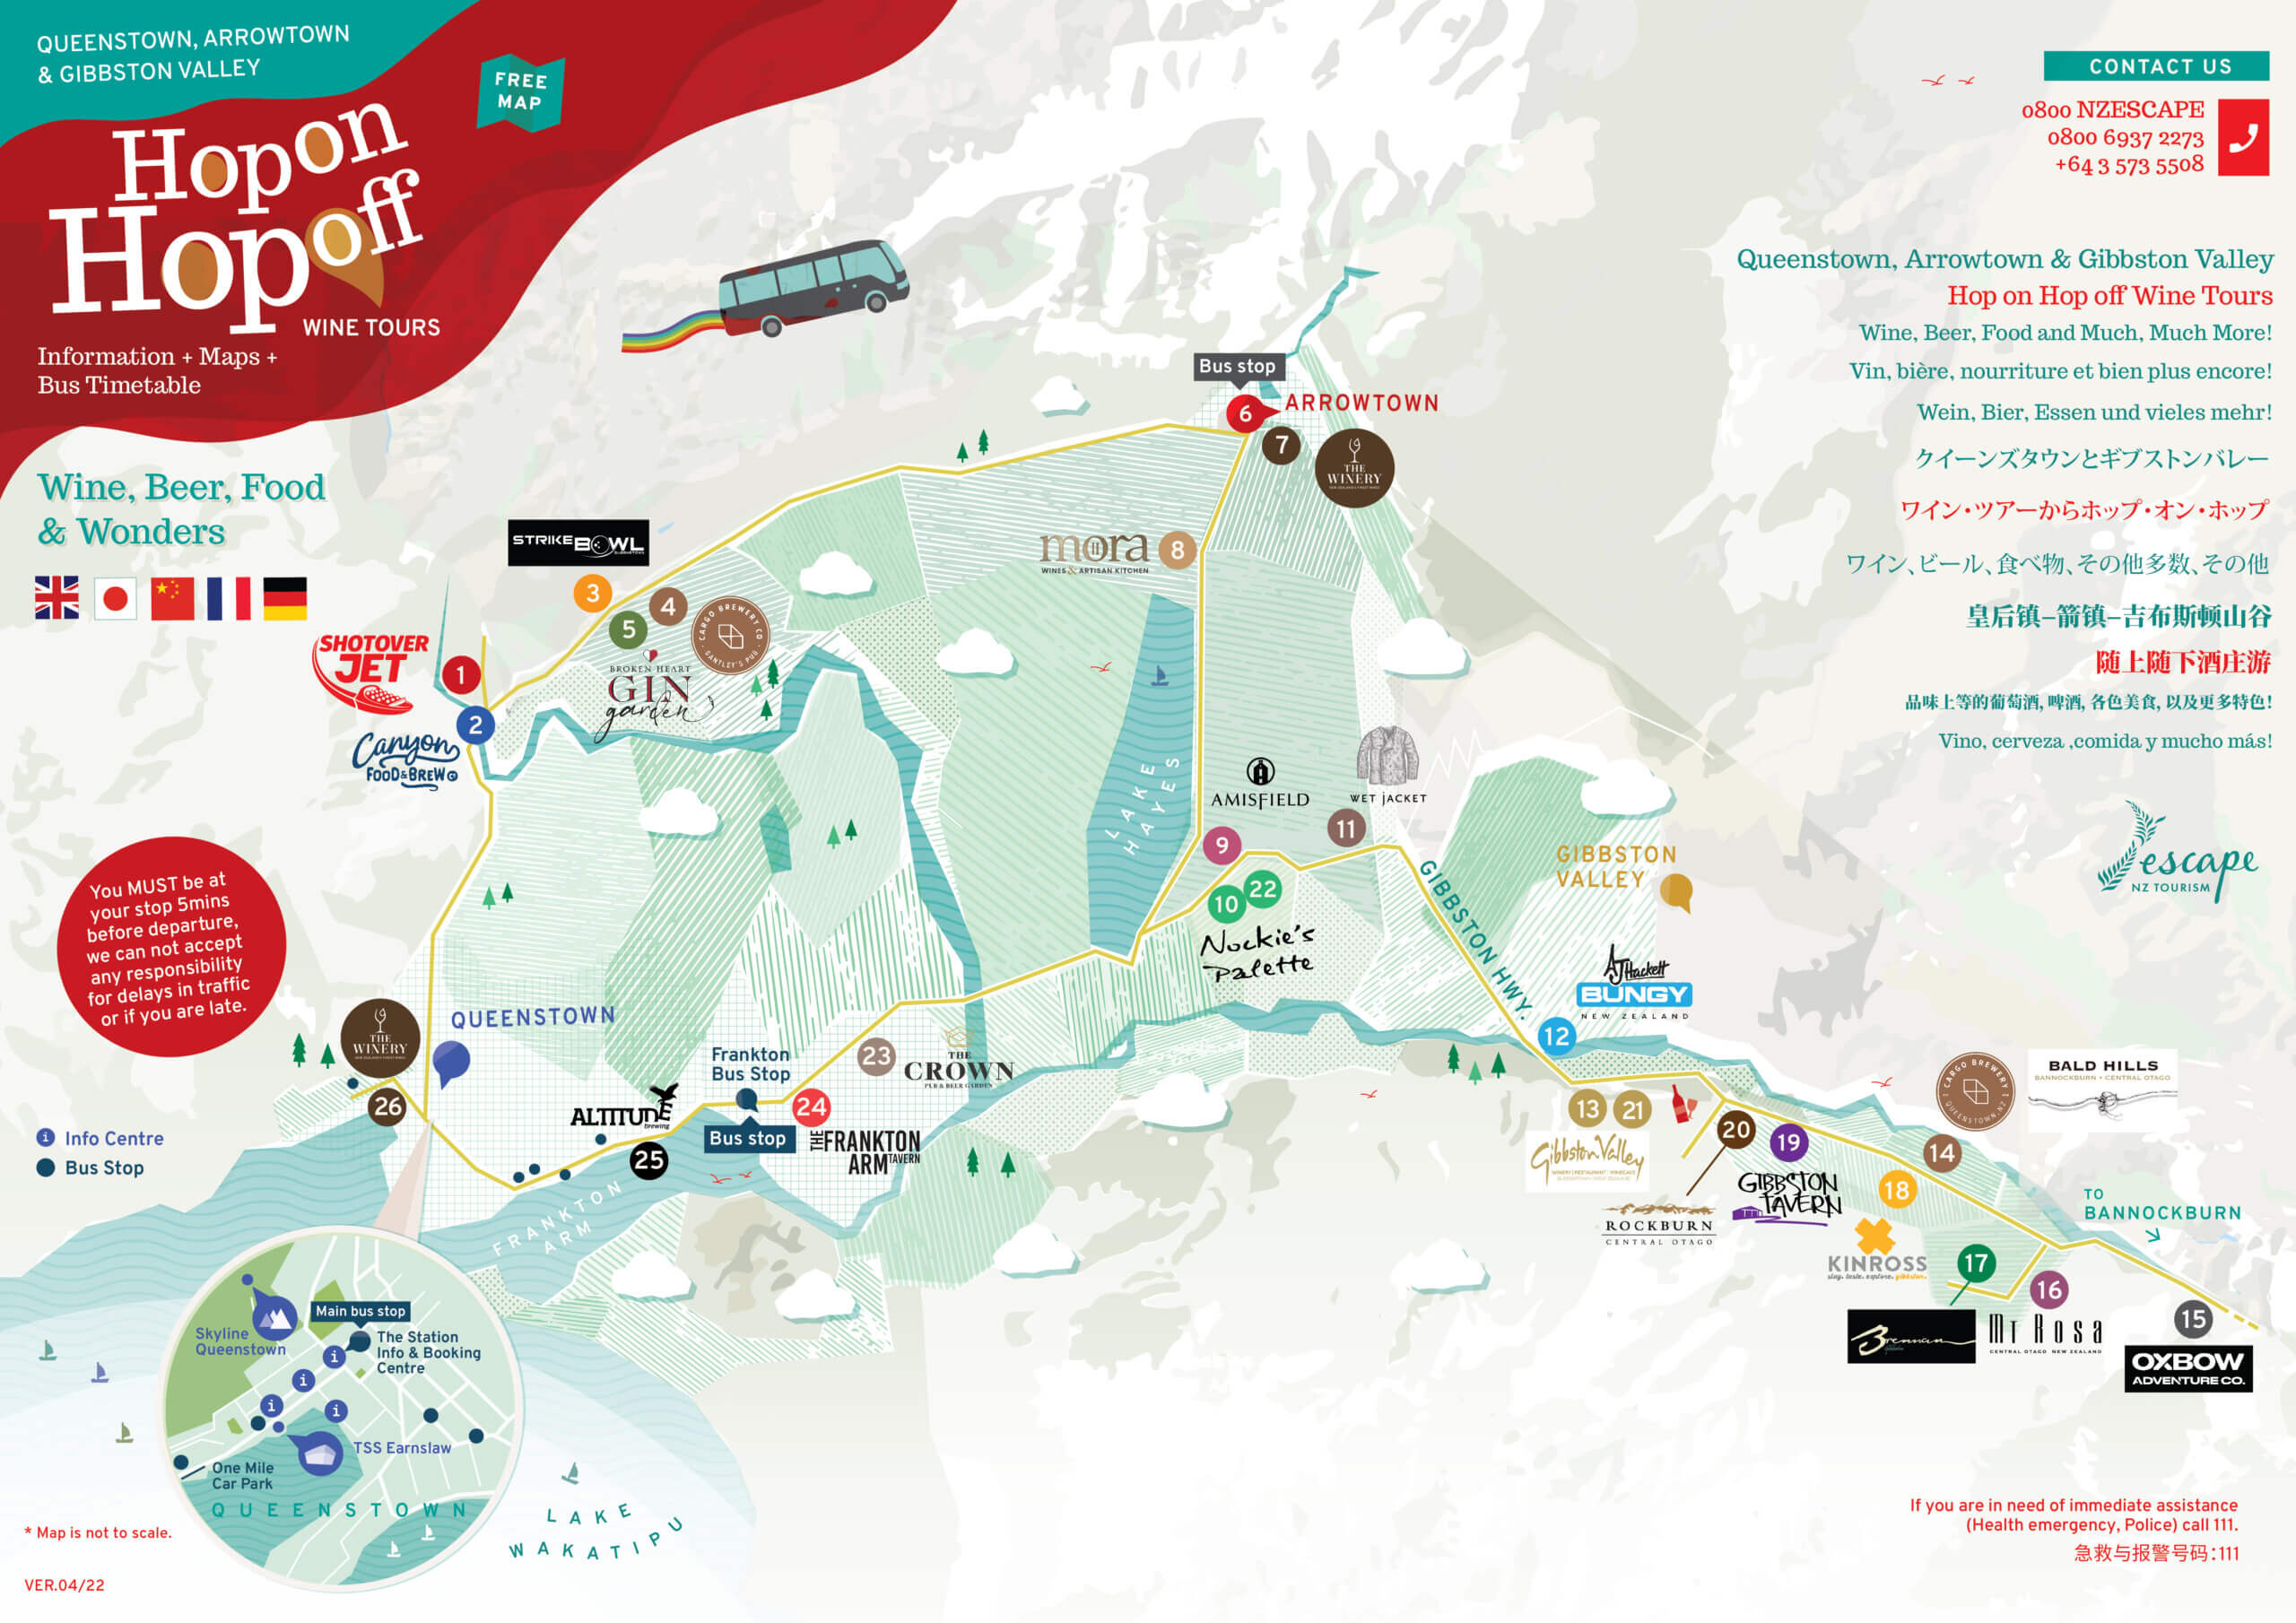 Queenstown Wine & Beer Tour Map With Hop On Hop Off Tours (Sunday - Friday)